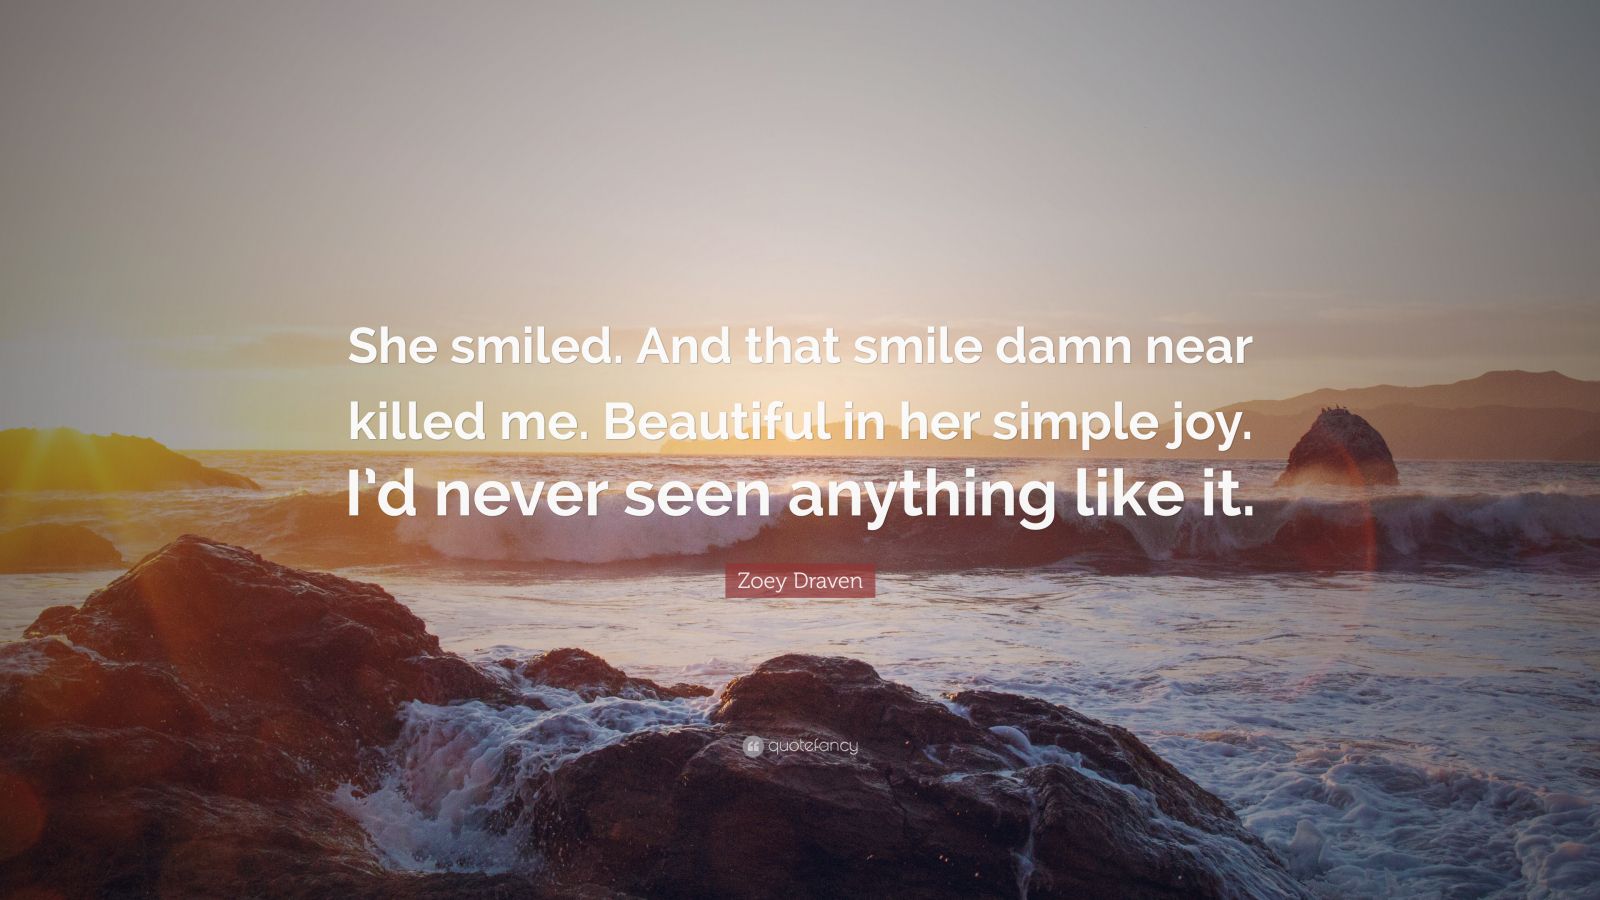 https://quotefancy.com/media/wallpaper/1600x900/8095288-Zoey-Draven-Quote-She-smiled-And-that-smile-damn-near-killed-me-Beautiful-in-her.jpg